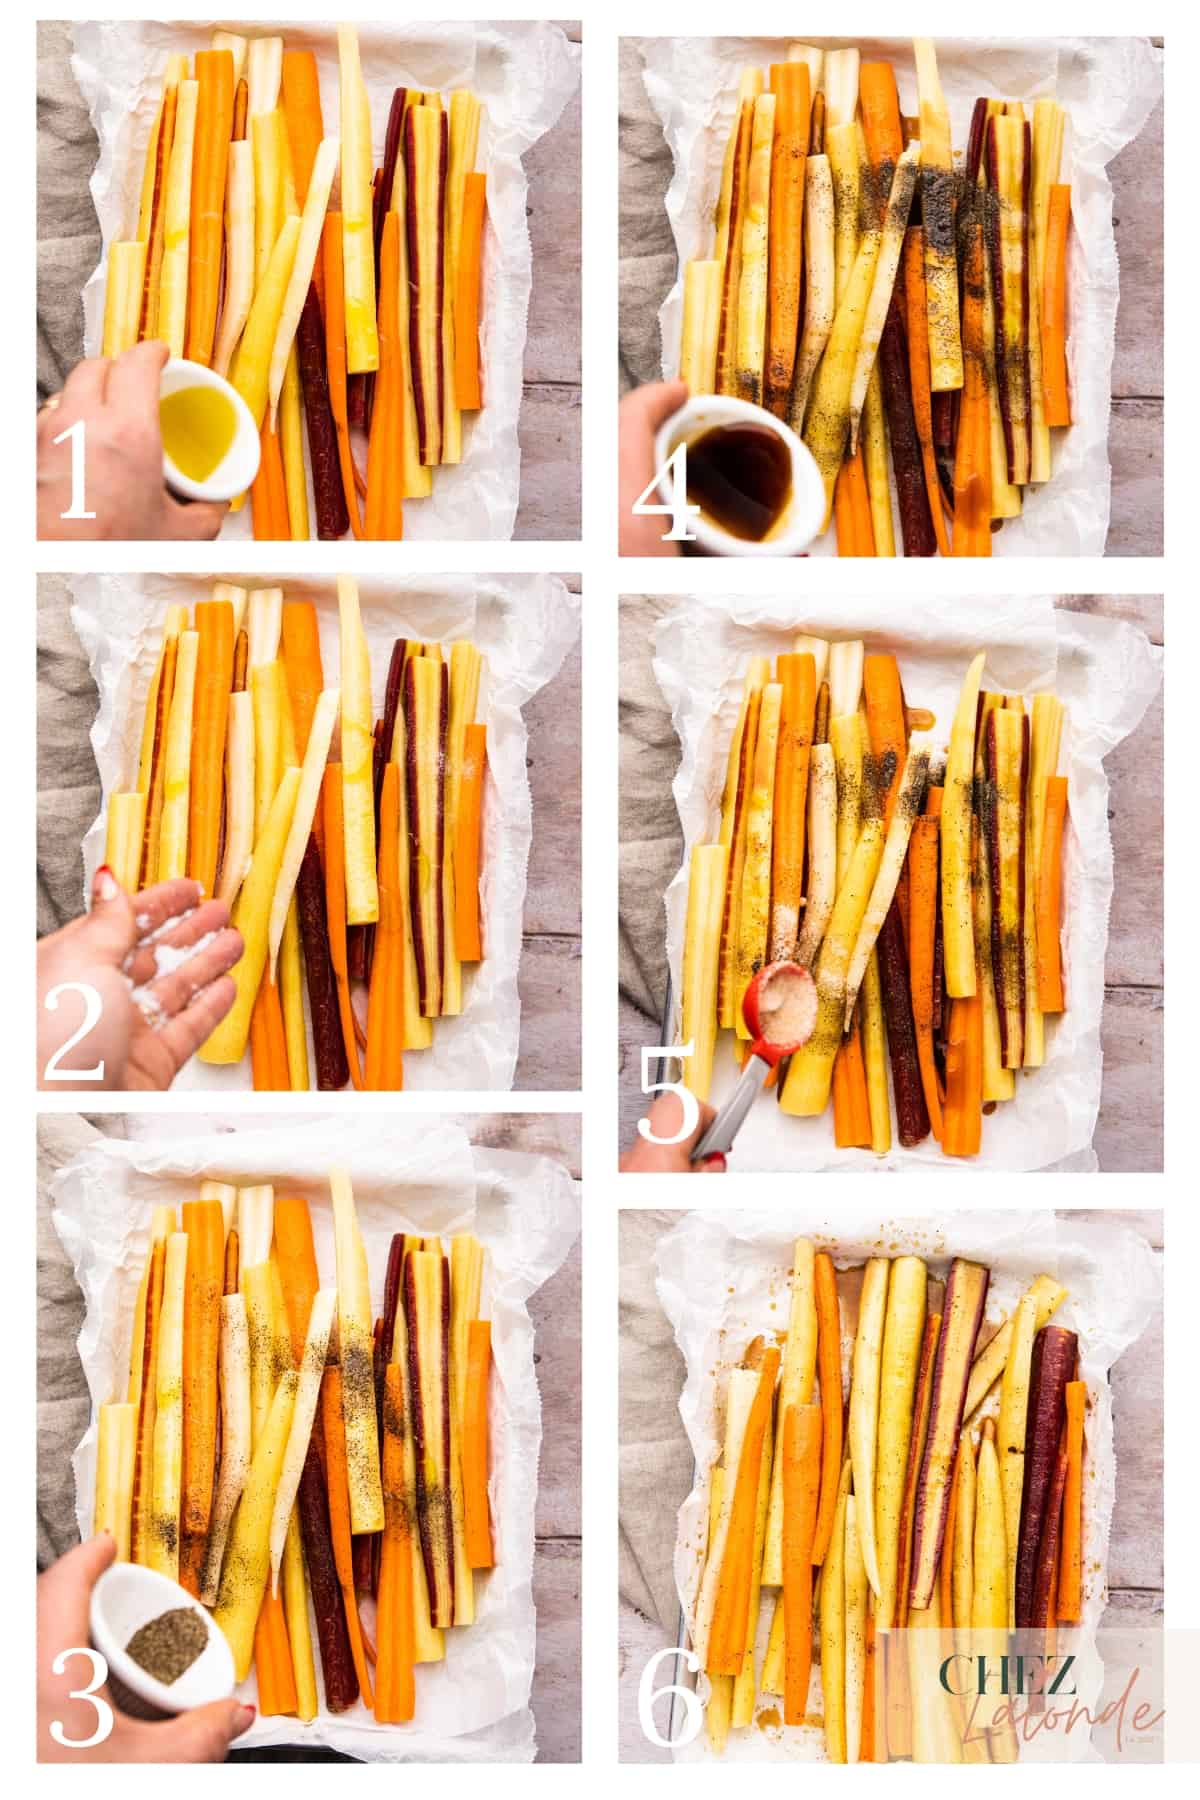 A step by step demonstration on how to season rainbow carrots and prep for roasting. 